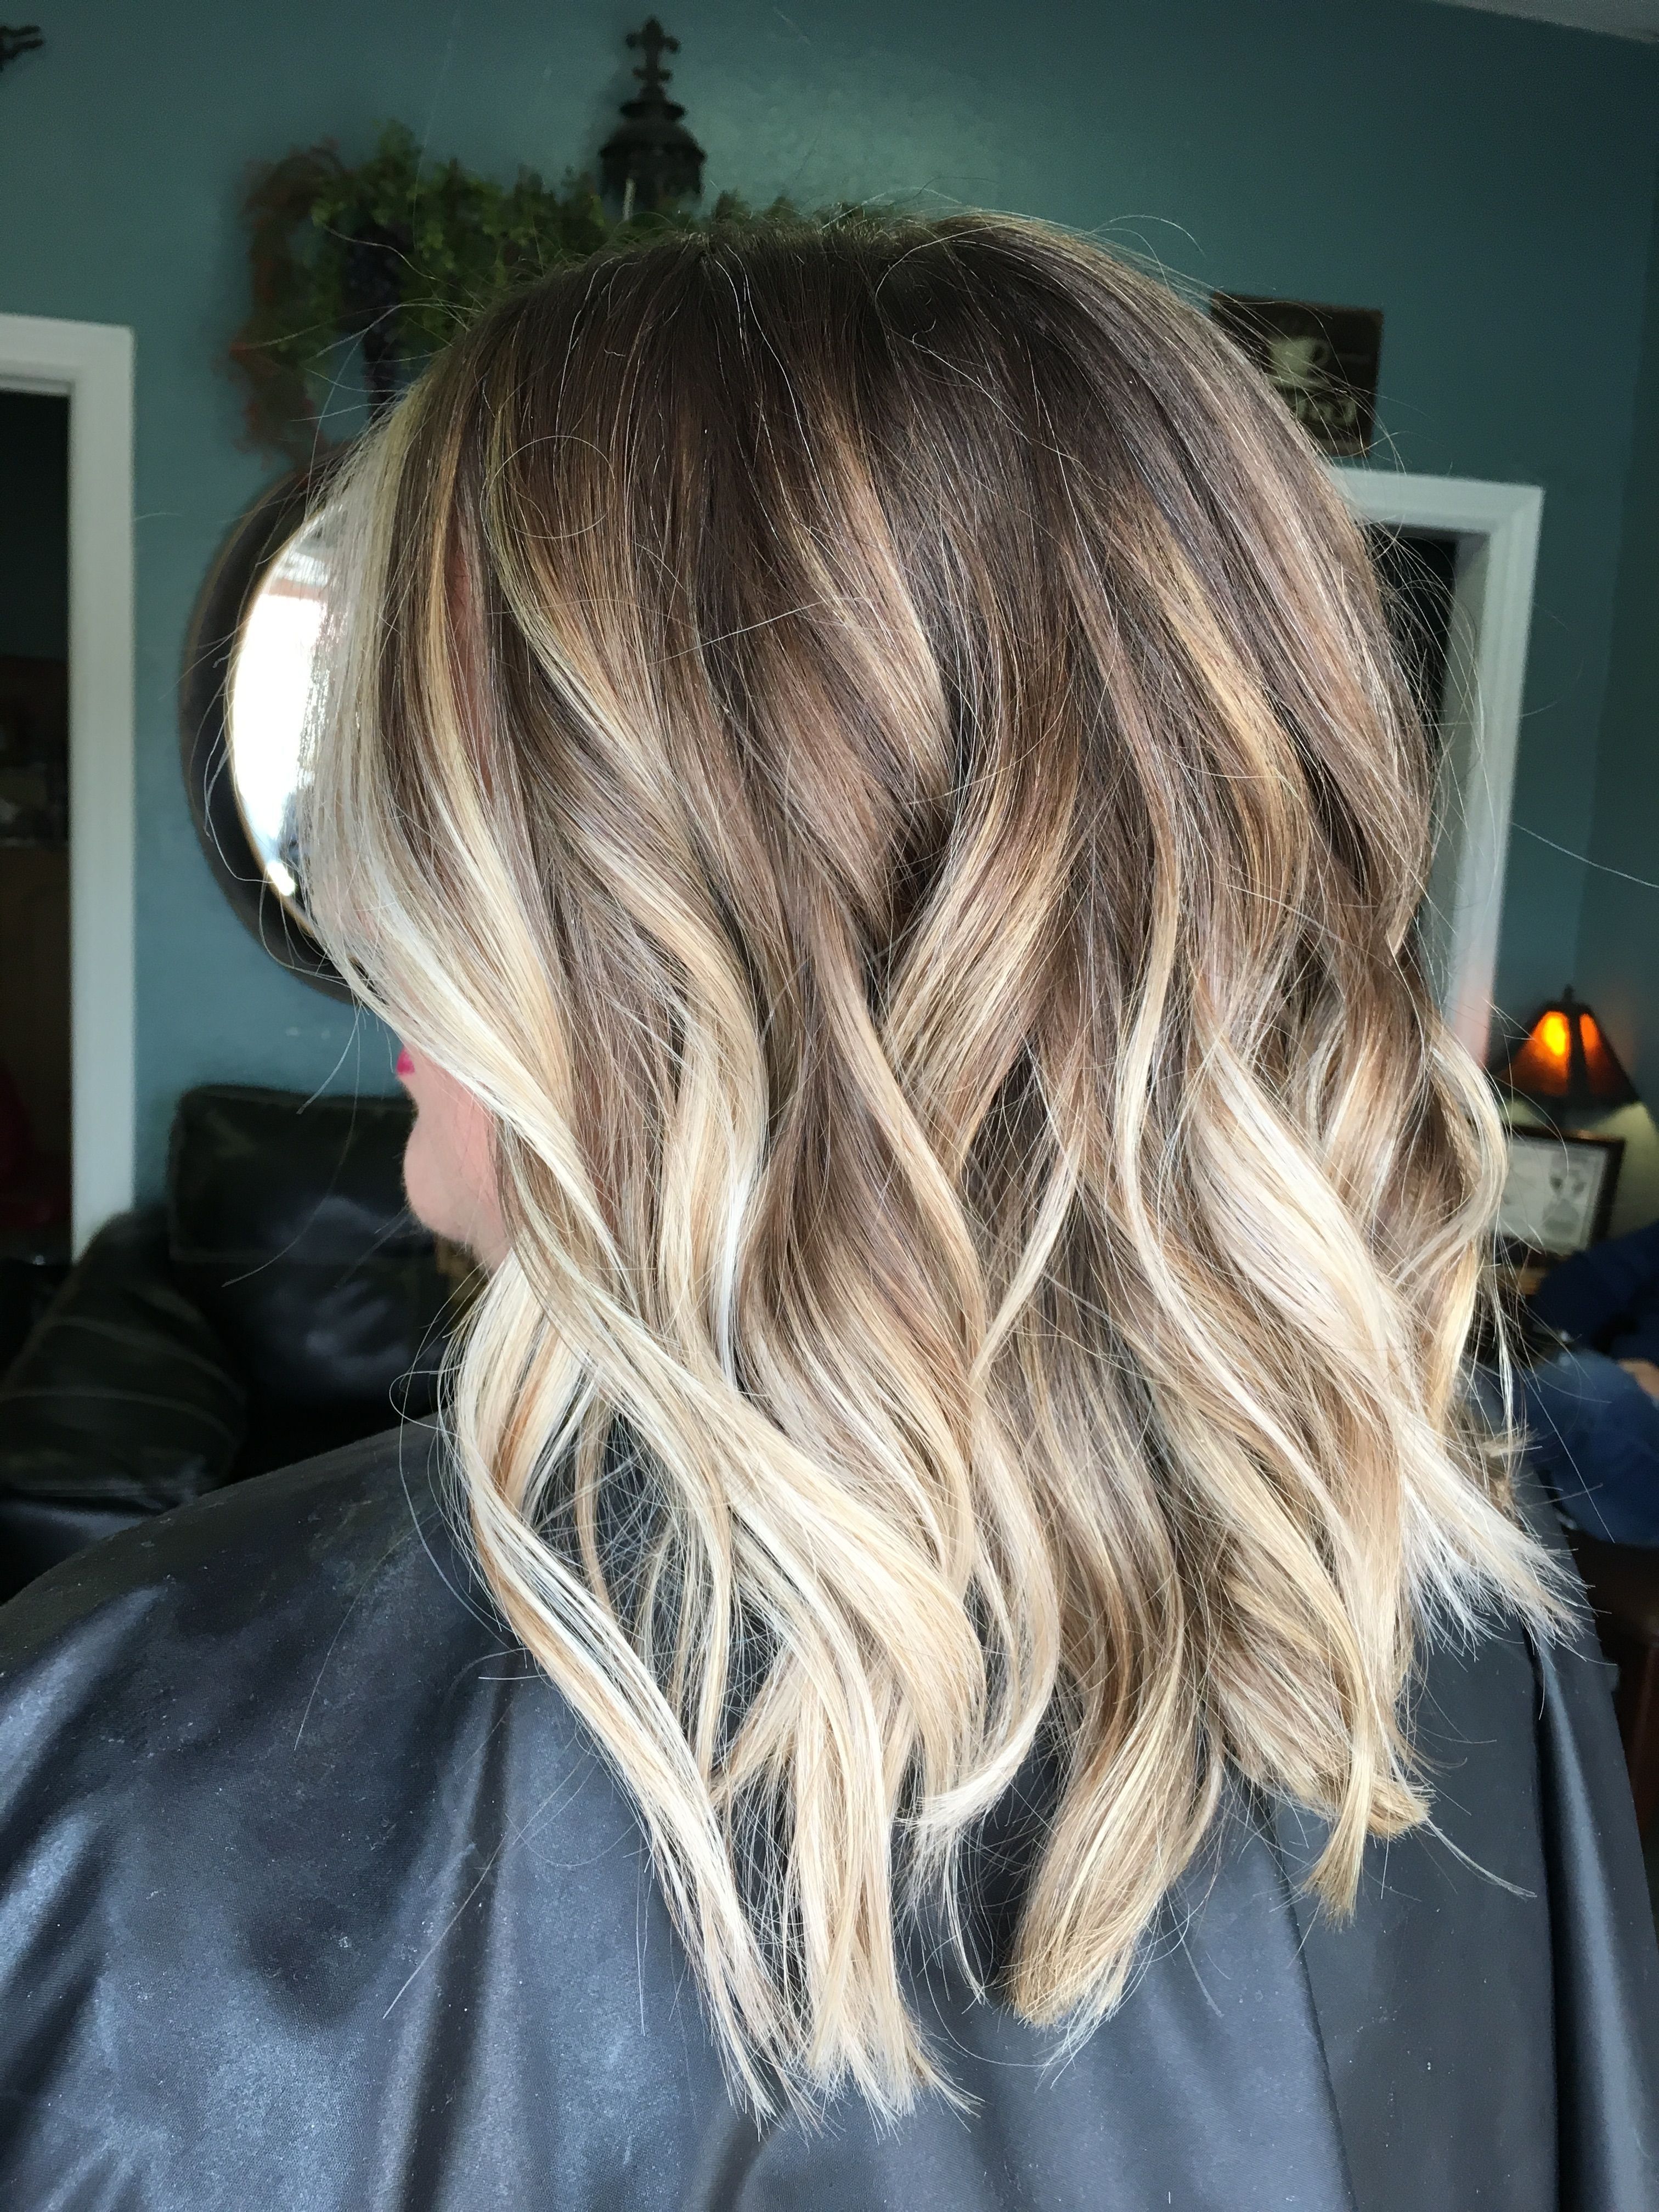 Recent Long Bob Blonde Hairstyles With Babylights Pertaining To Balayage, Blonde Hair, Brown Hair, Blonde Highlights, Lob, Bob (View 2 of 20)